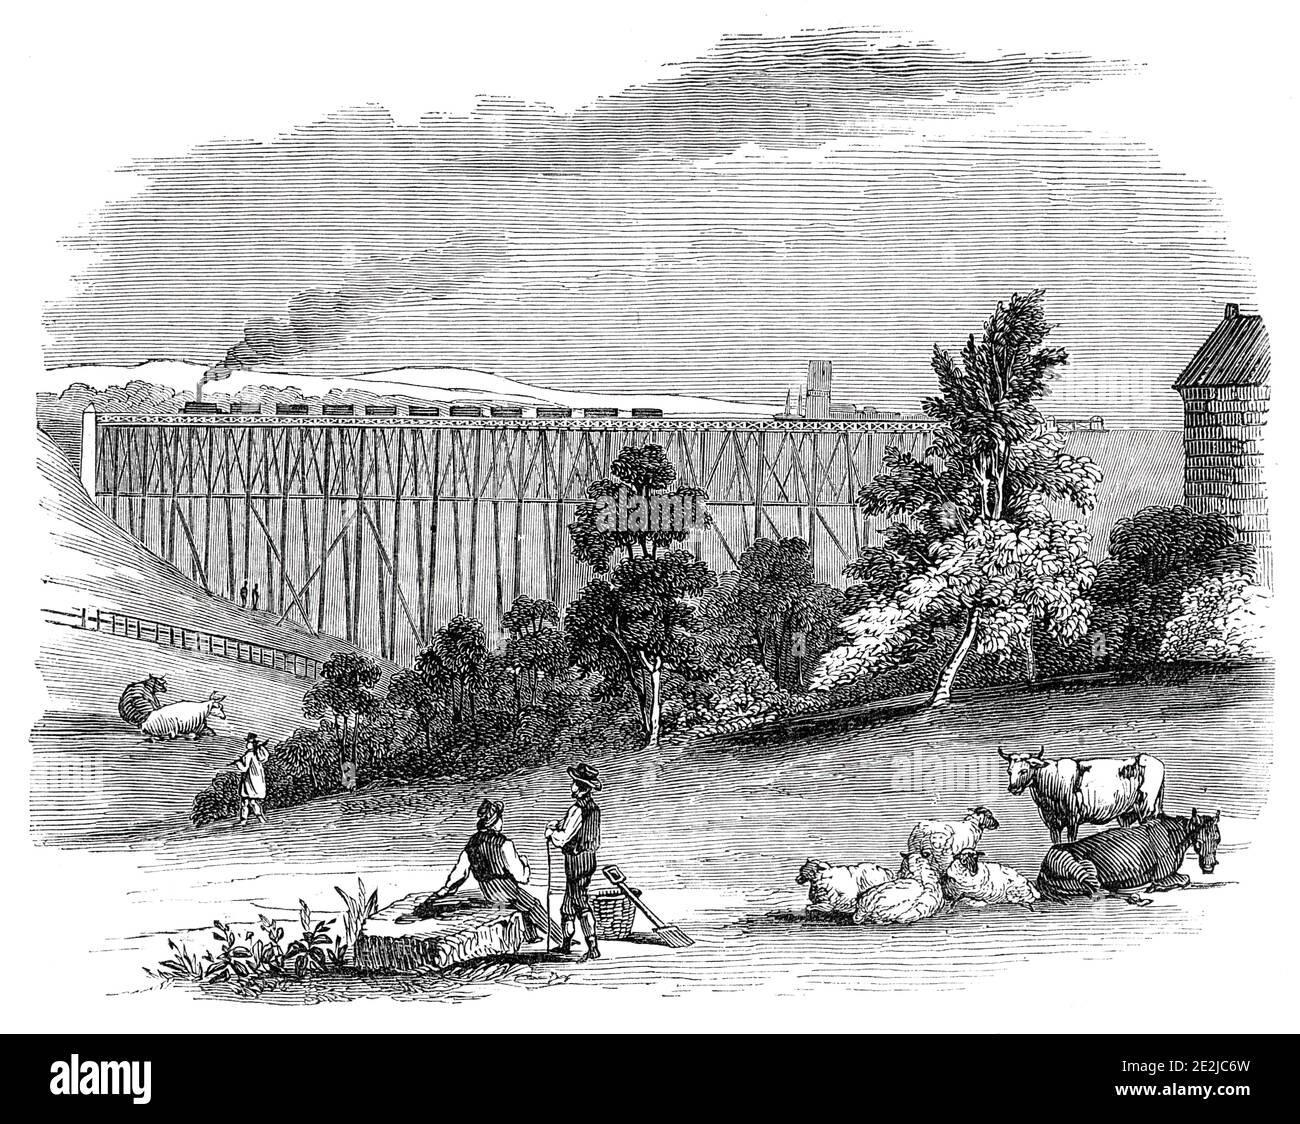 Timber Viaduct on the Darlington and Newcastle Railway, 1844. Railway bridge over the River Sherbourne. 'The value of timber viaducts, as the means of effecting the economical construction of railways, is a point of engineering practice becoming daily of greater importance. Those on the Newcastle and Darlington railway are the work of Mr. Harrison. The Sherburn construction is from 60 to 70 feet high; it is founded on piles driven 35 feet into the ground; several courses of masonry rest on these piles, and from the masonry spring the light tall timber baulks that support the railing. A single Stock Photo